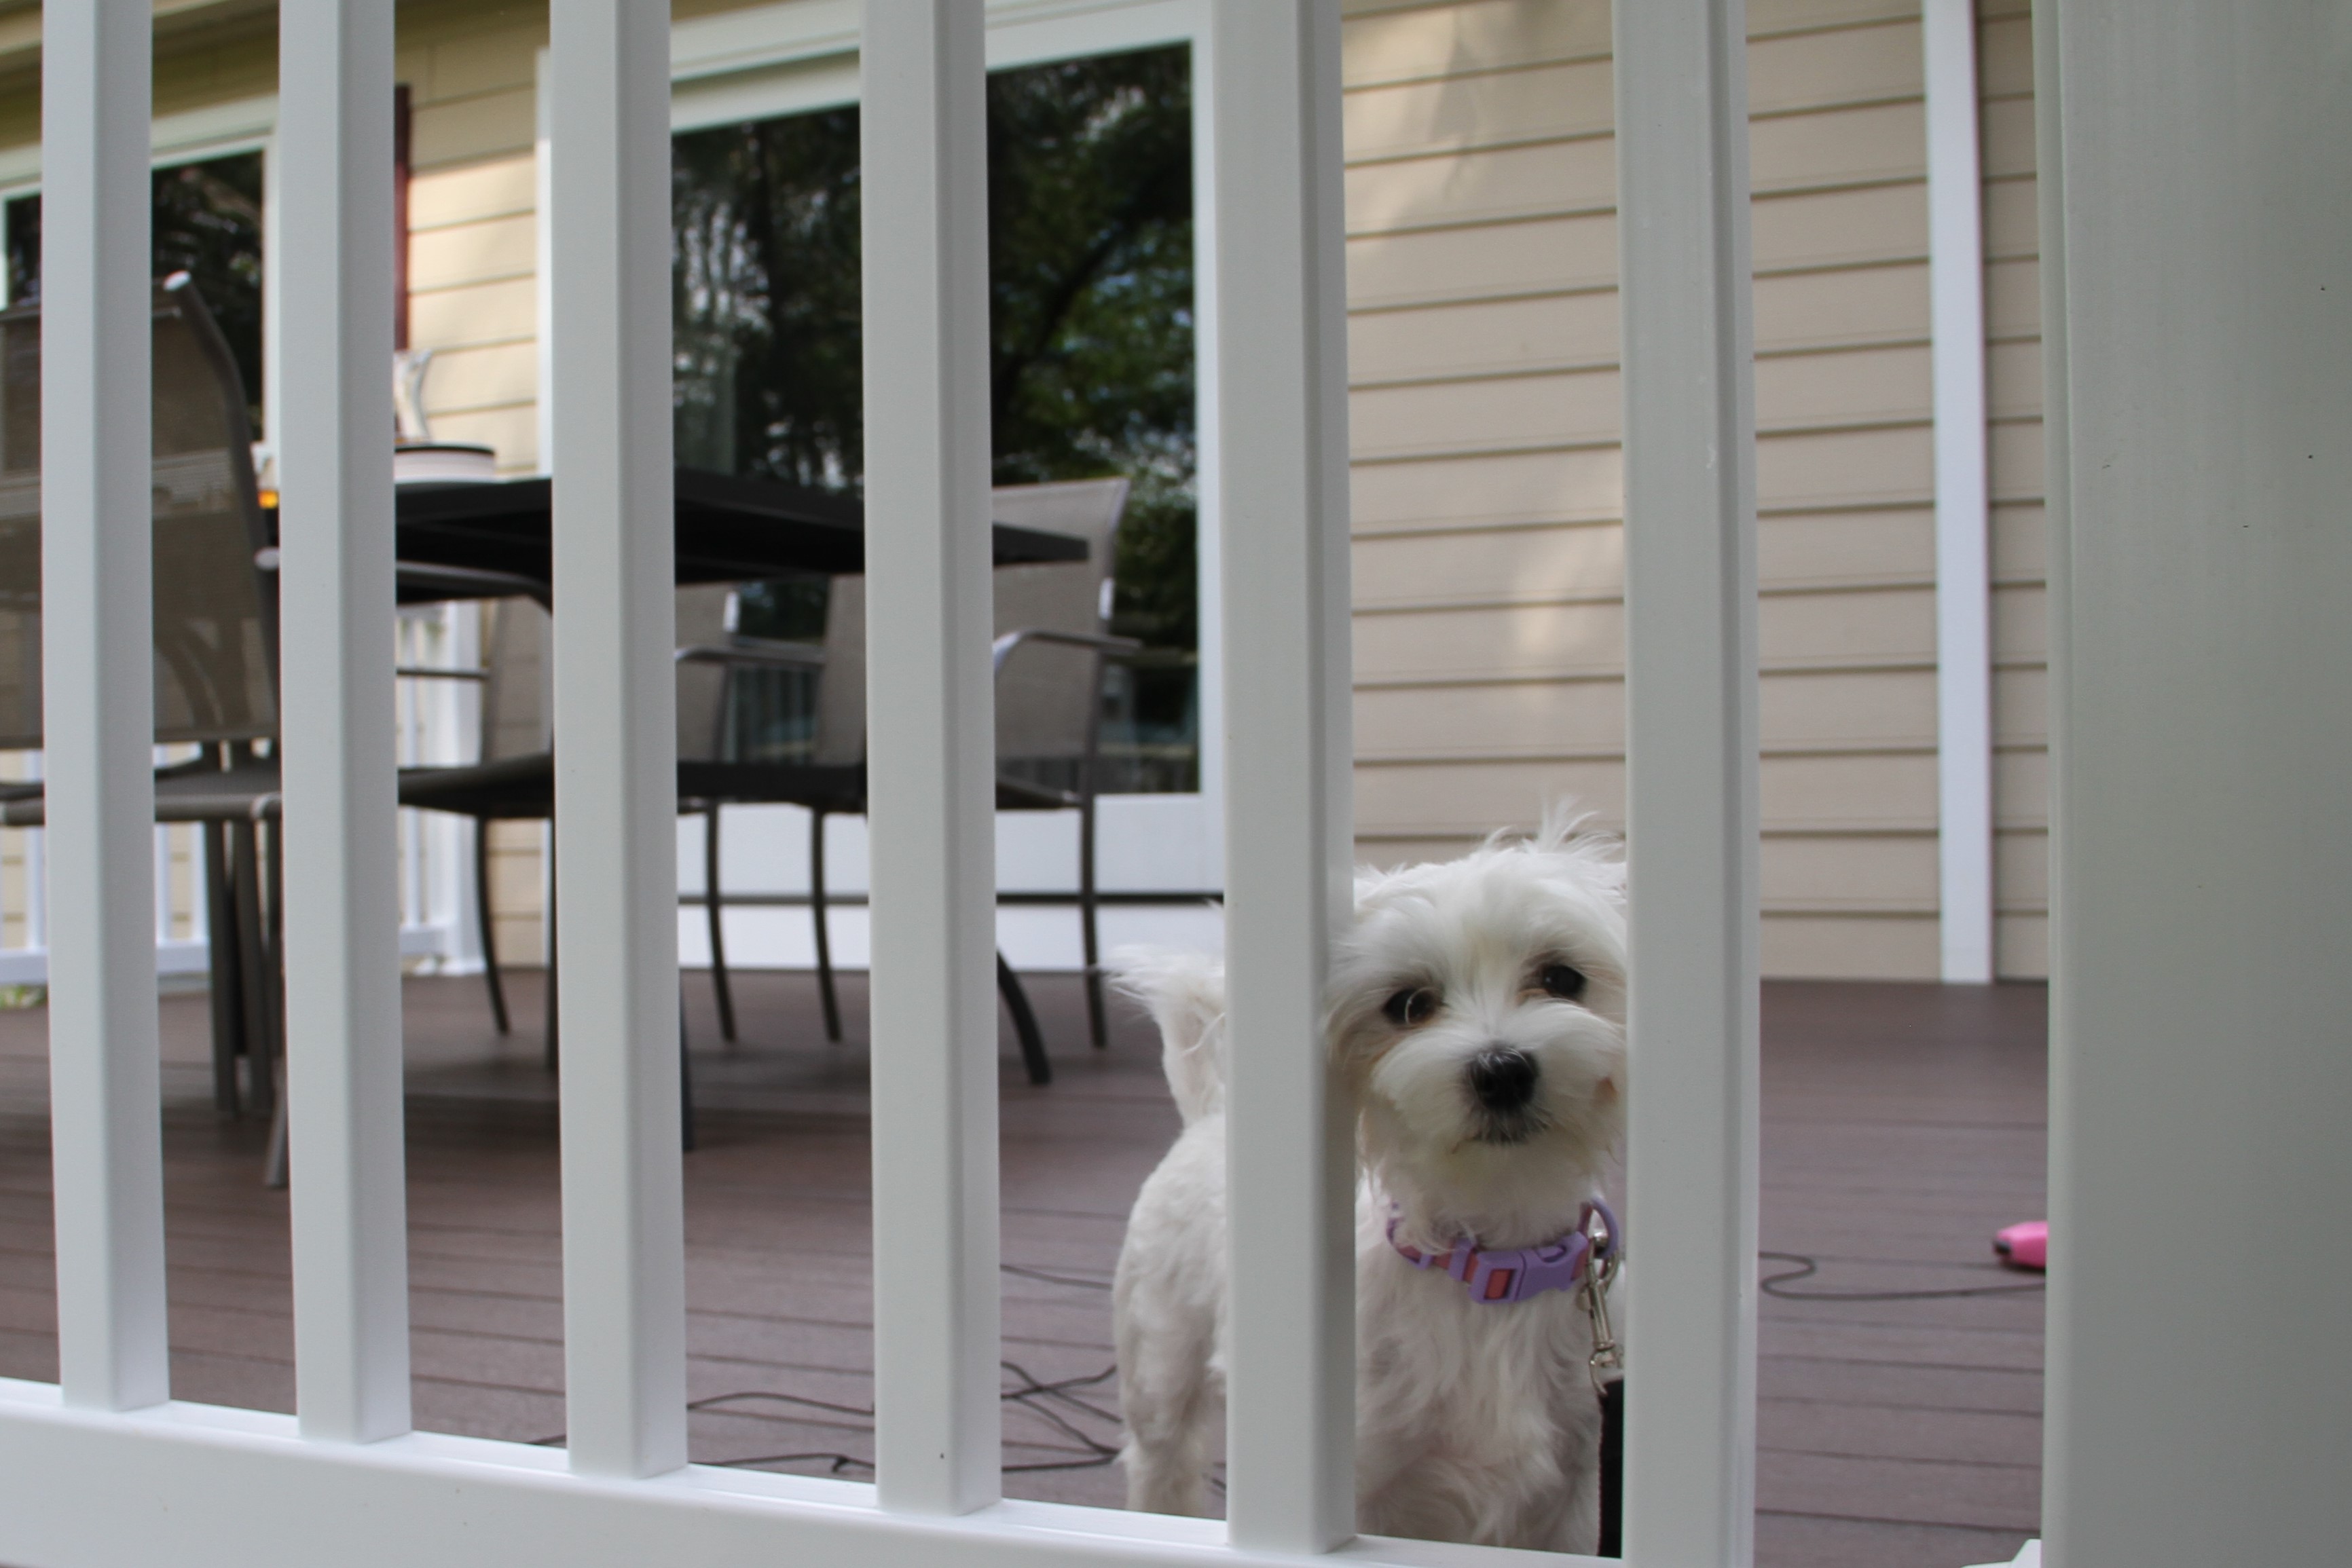 3 Considerations When Choosing a Fence for Your Dog